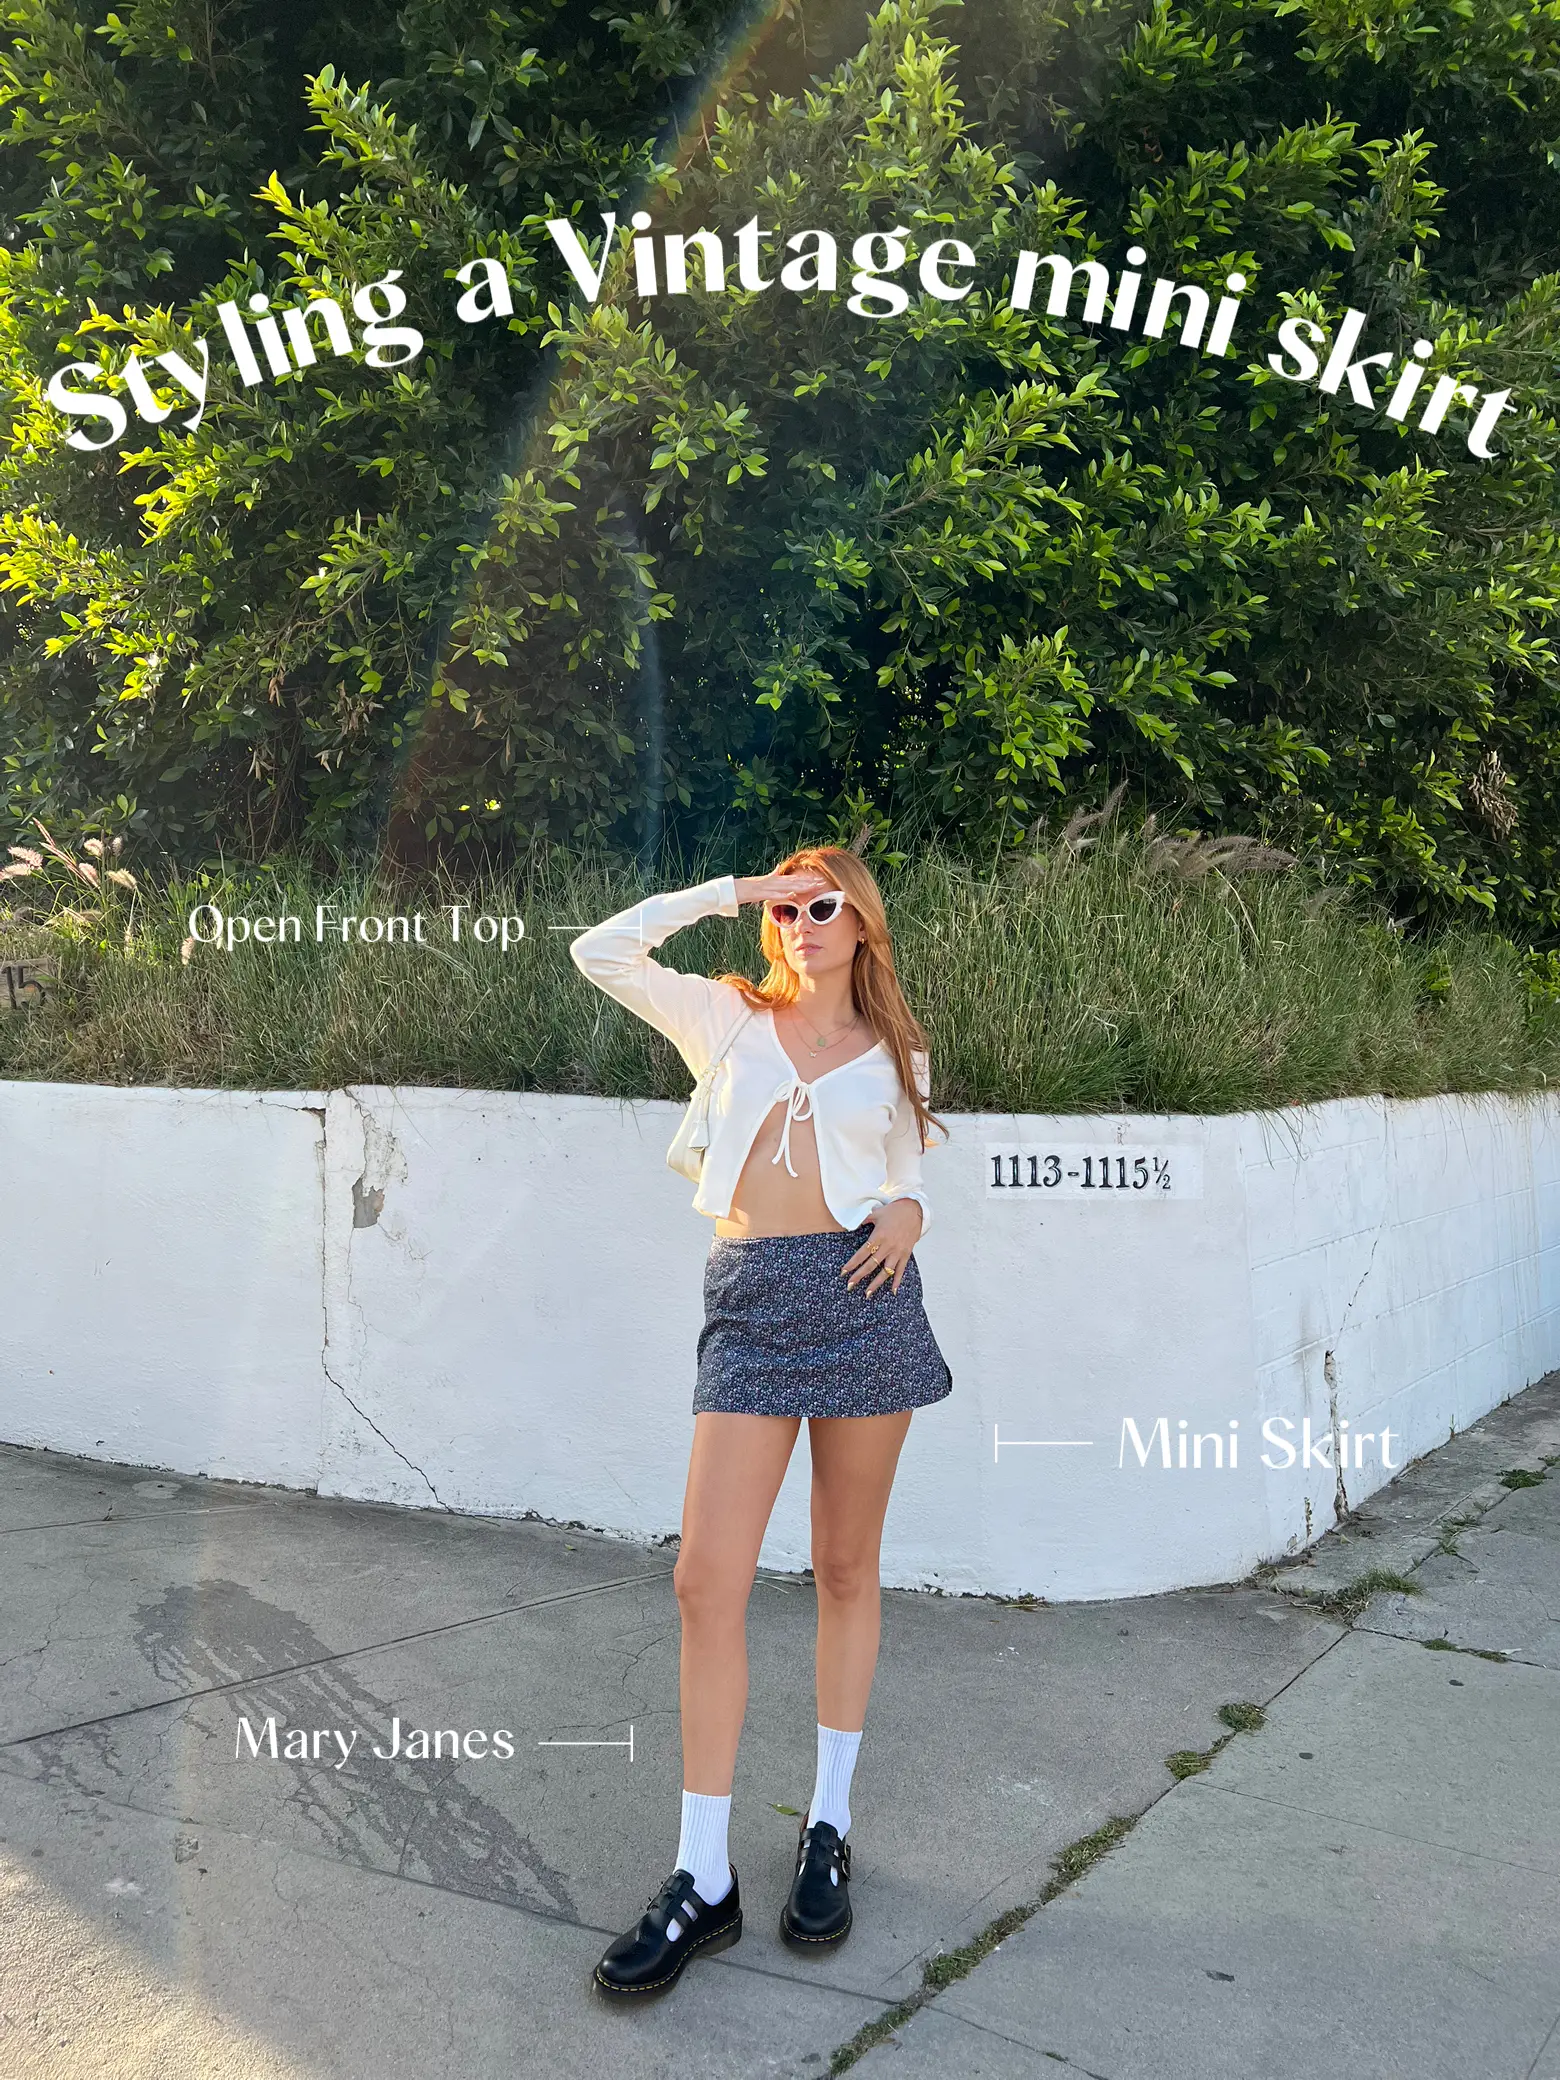 Styling a Vintage Mini Skirt, Gallery posted by Hailey Scott